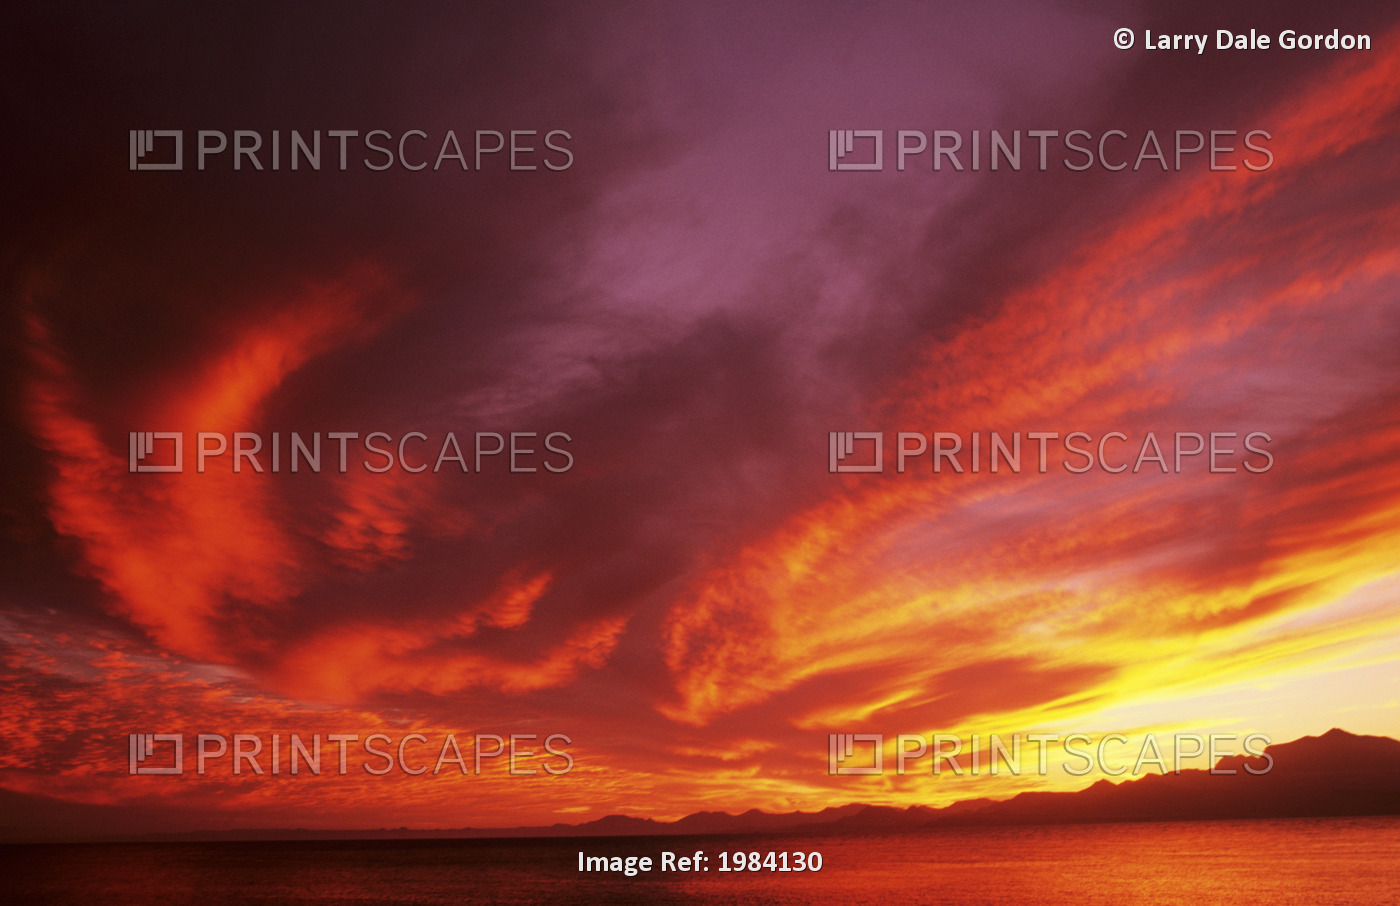 Sunset Over Seascape, Brightly Colored Clouds Illuminated Over Ocean.